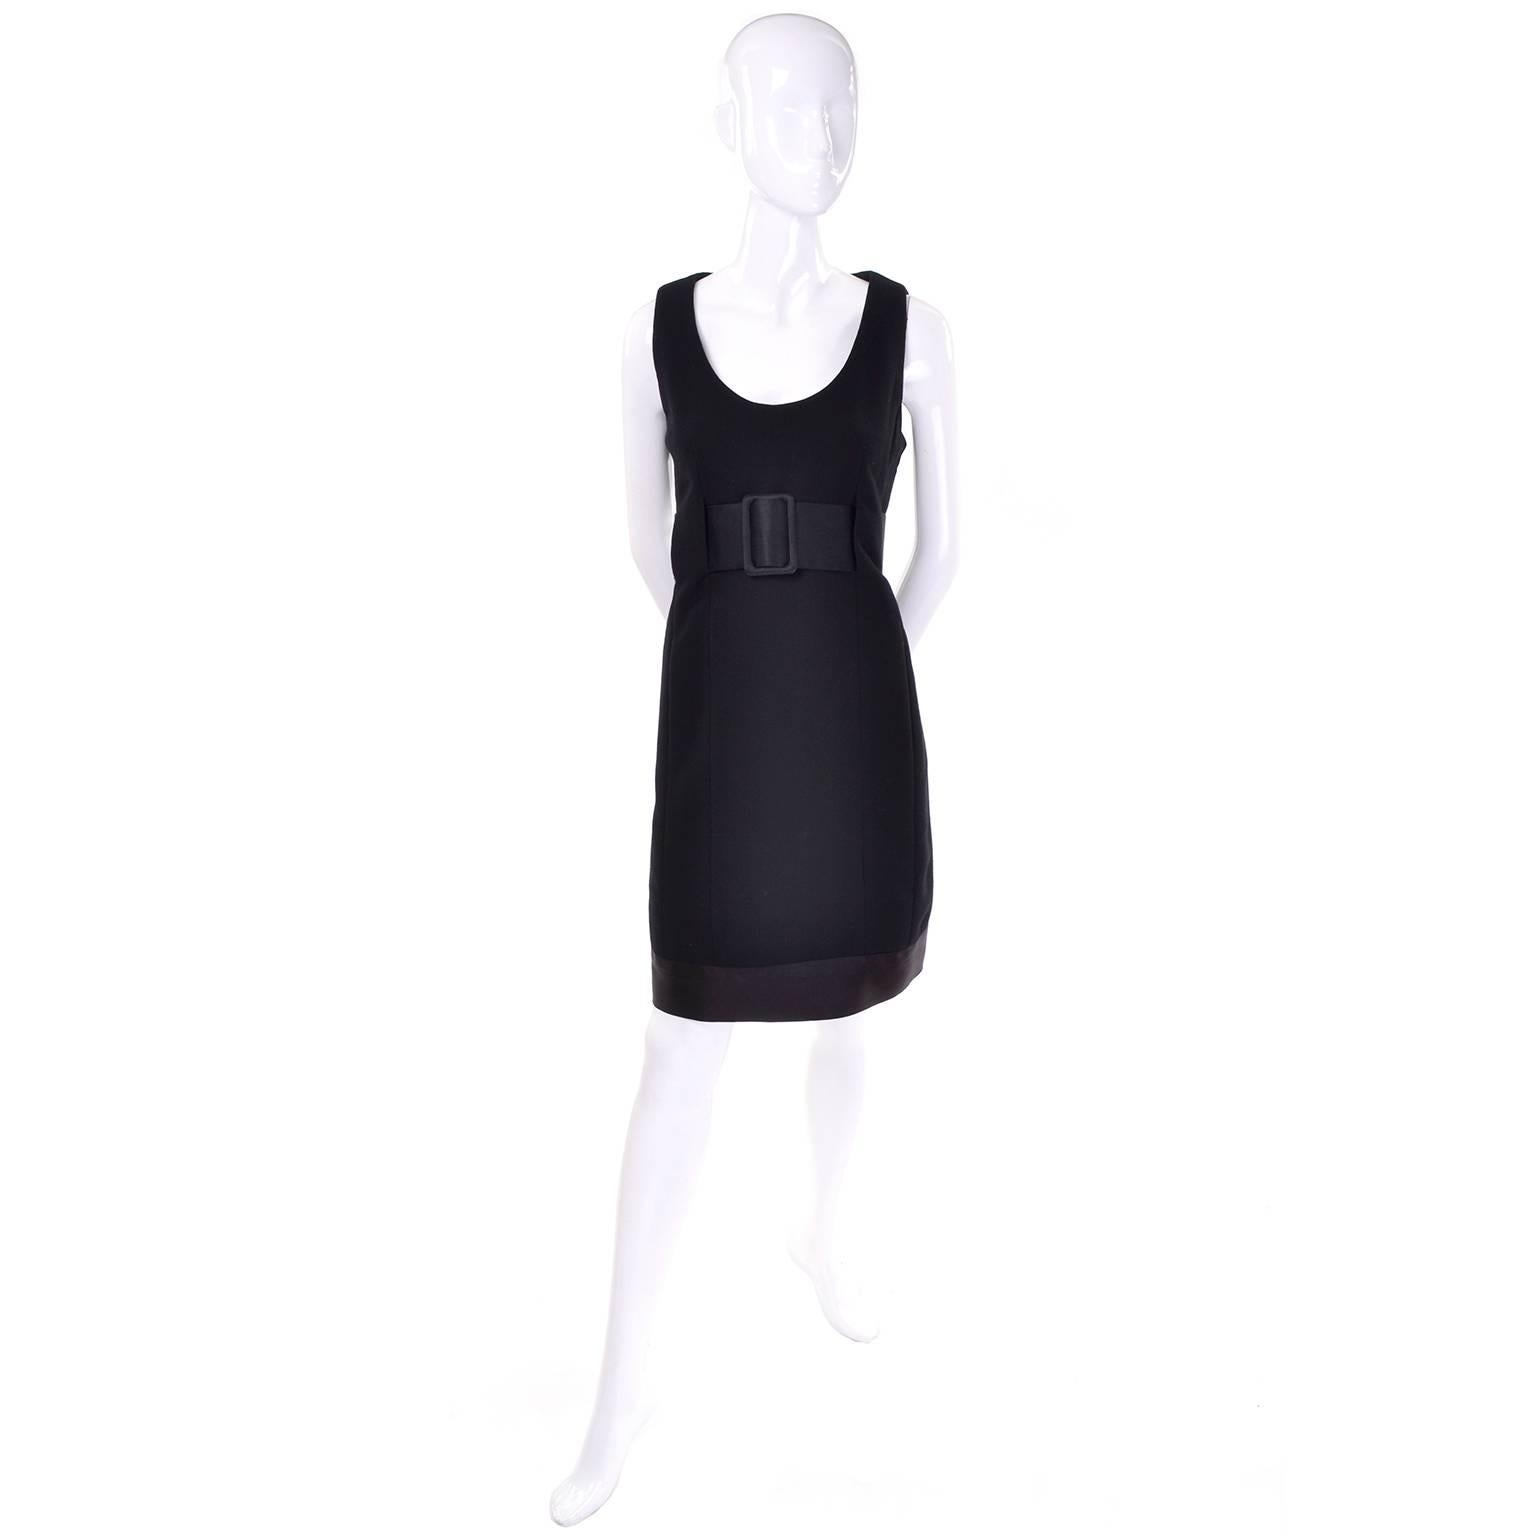 This is such an incredible vintage little black wool crepe dress designed in the 1960's by Geoffrey Beene! The dress is fully lined and has a fabulous 3